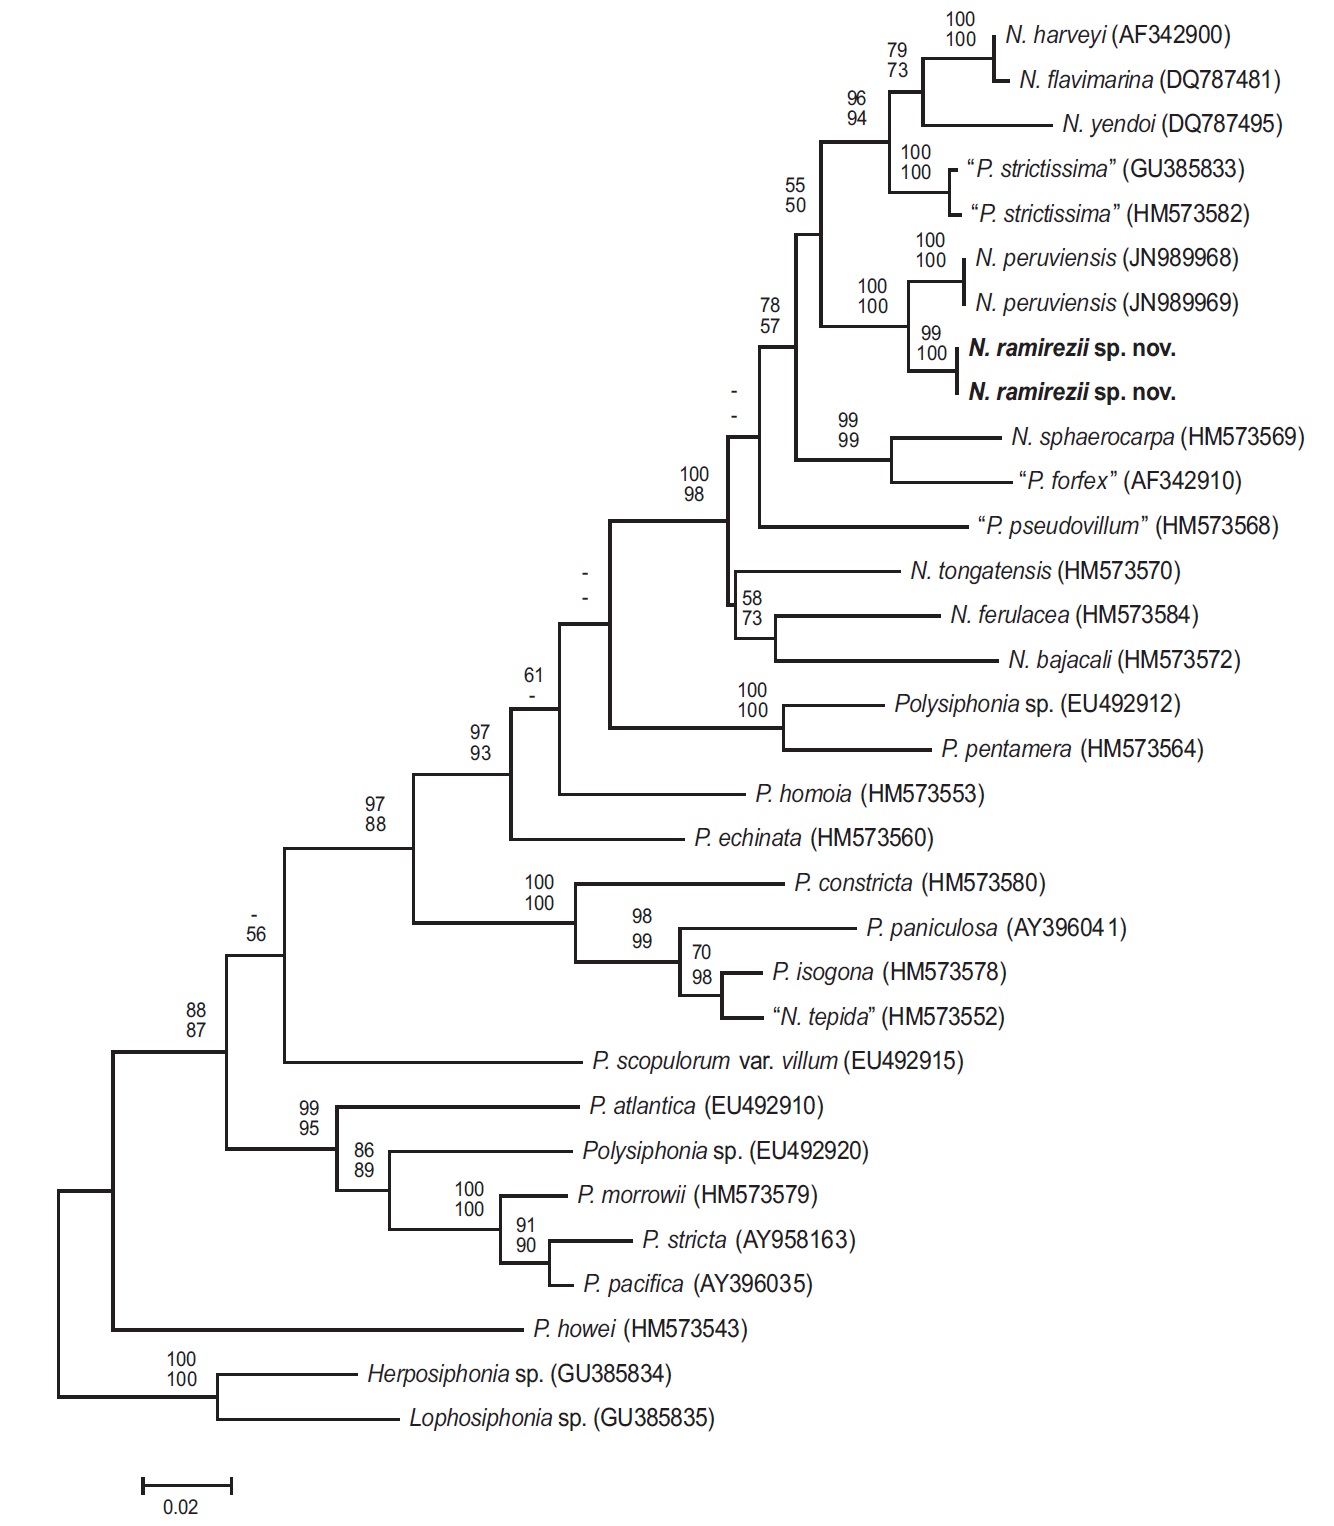 Phylogenetic tree based on rbcL sequences inferred from maximum-likelihood (ML) analysis using the general time reversible model (GTR model) + invariable sites (I) + Gamma distribution (G). Bootstrap proportion values (>50%) for ML (500 replicates, upper) and maximum parsimony (MP) (500 replicates, lower) are shown at the nodes.